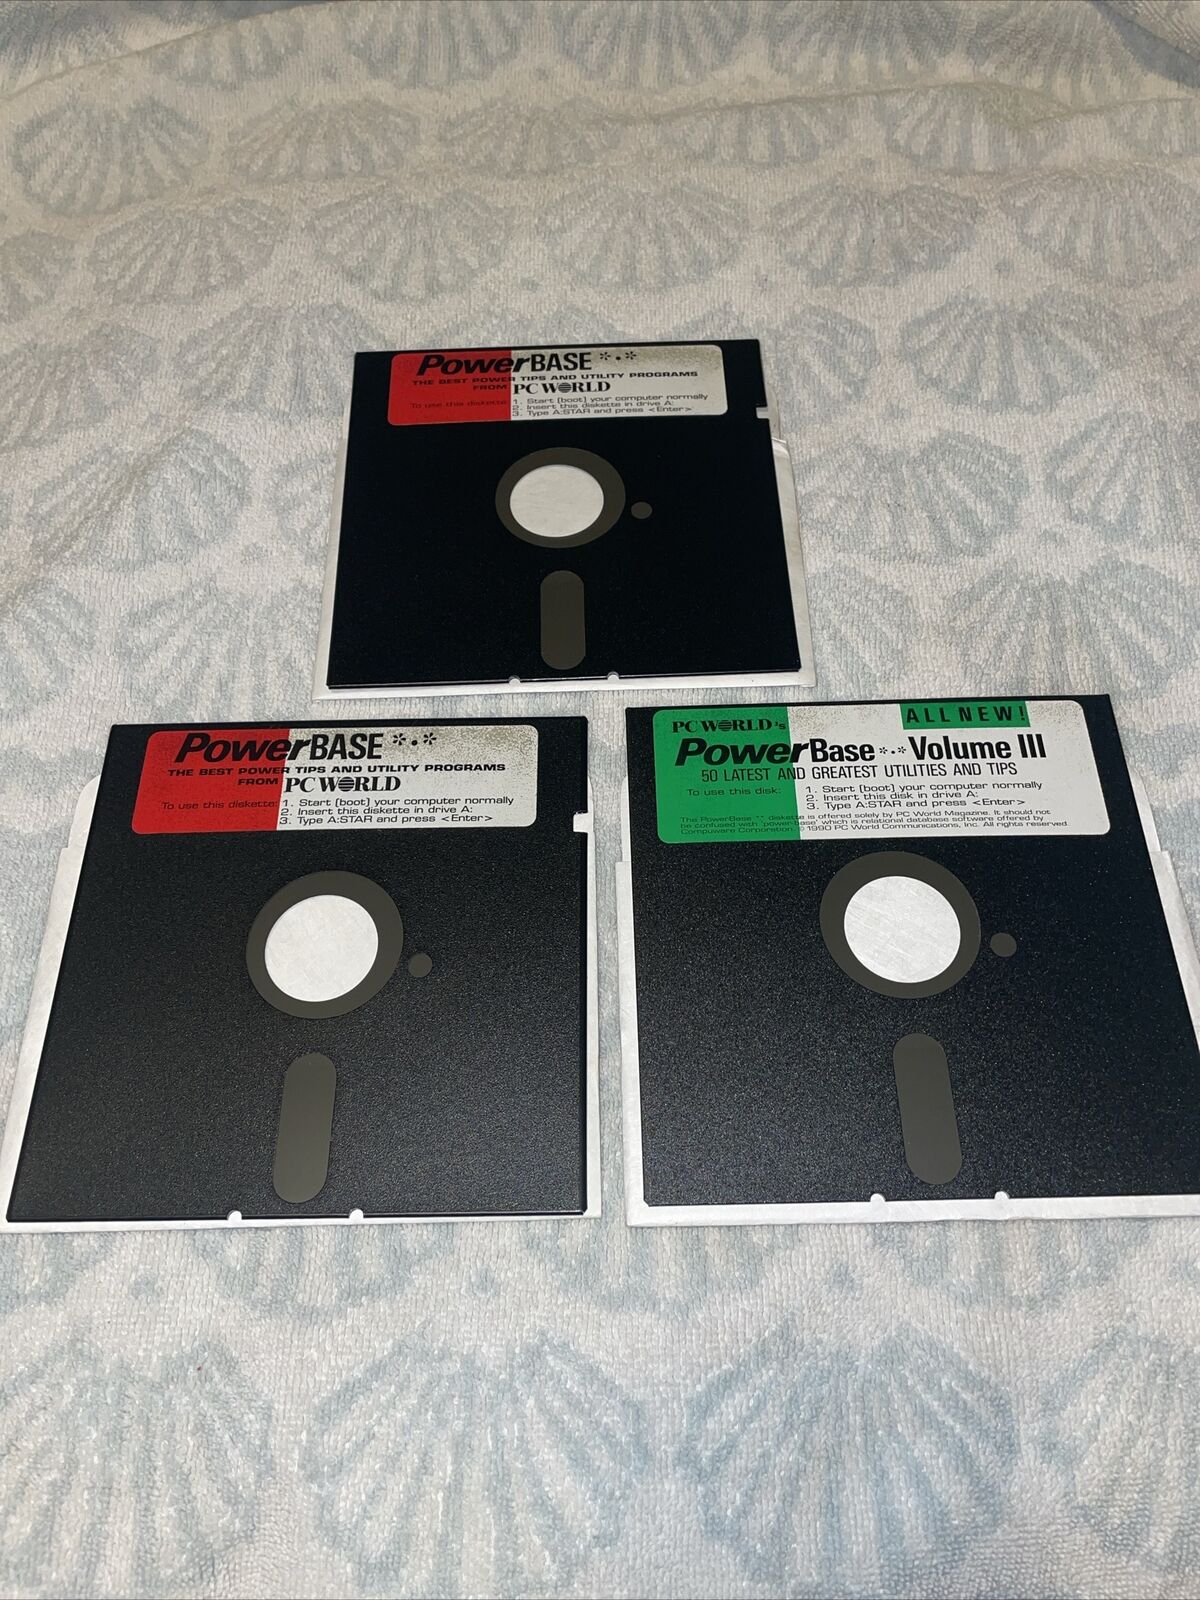 Vintage PC World PowerBase Tips And Utilities Software 5.25” Floppy Disks